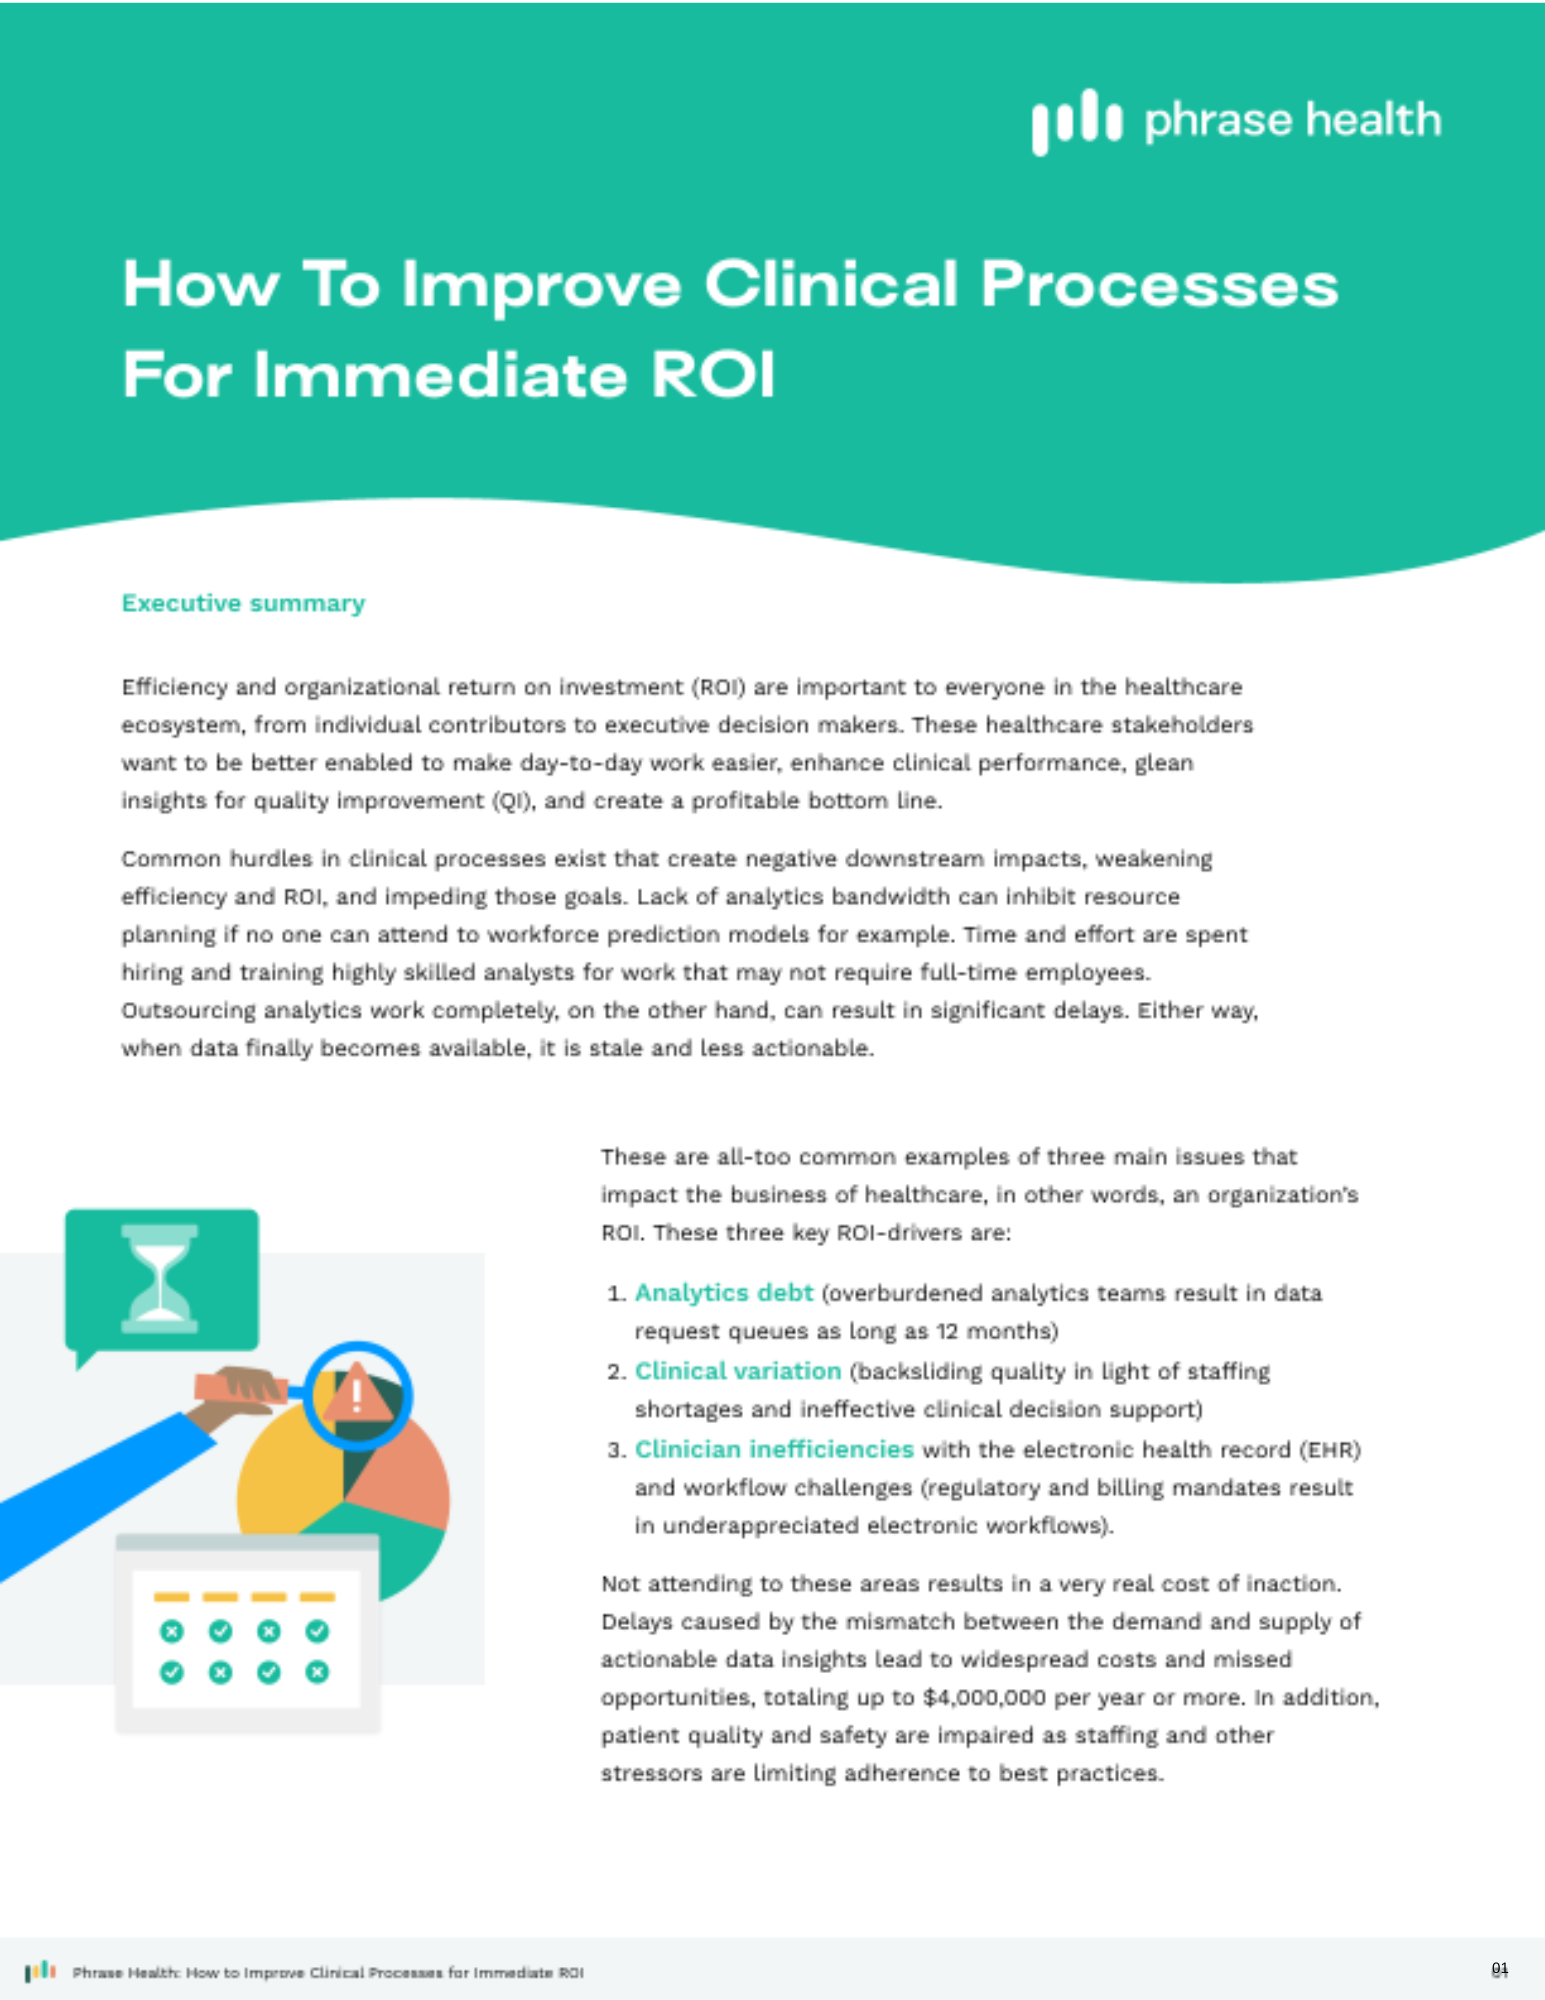 How to Improve Clinical Processes for Immediate ROI - landing page